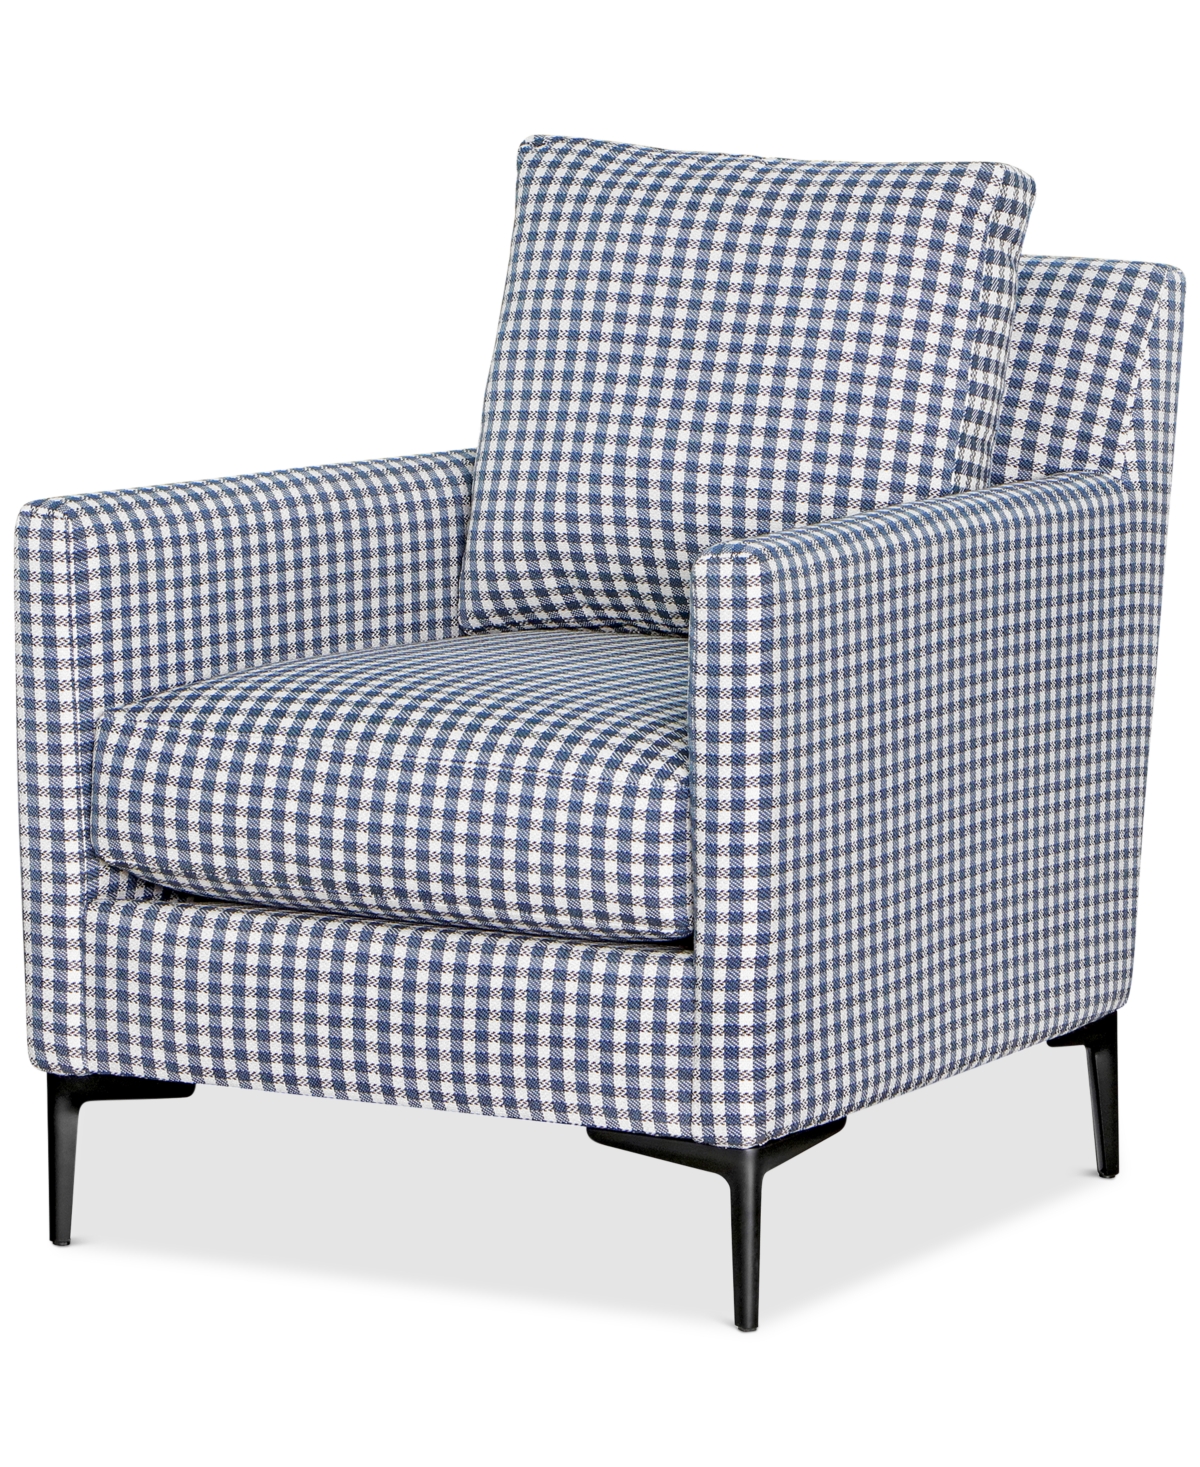 Furniture Closeout! Laylanna 28" Fabric Patterned Accent Chair, Created For Macy's In Blue